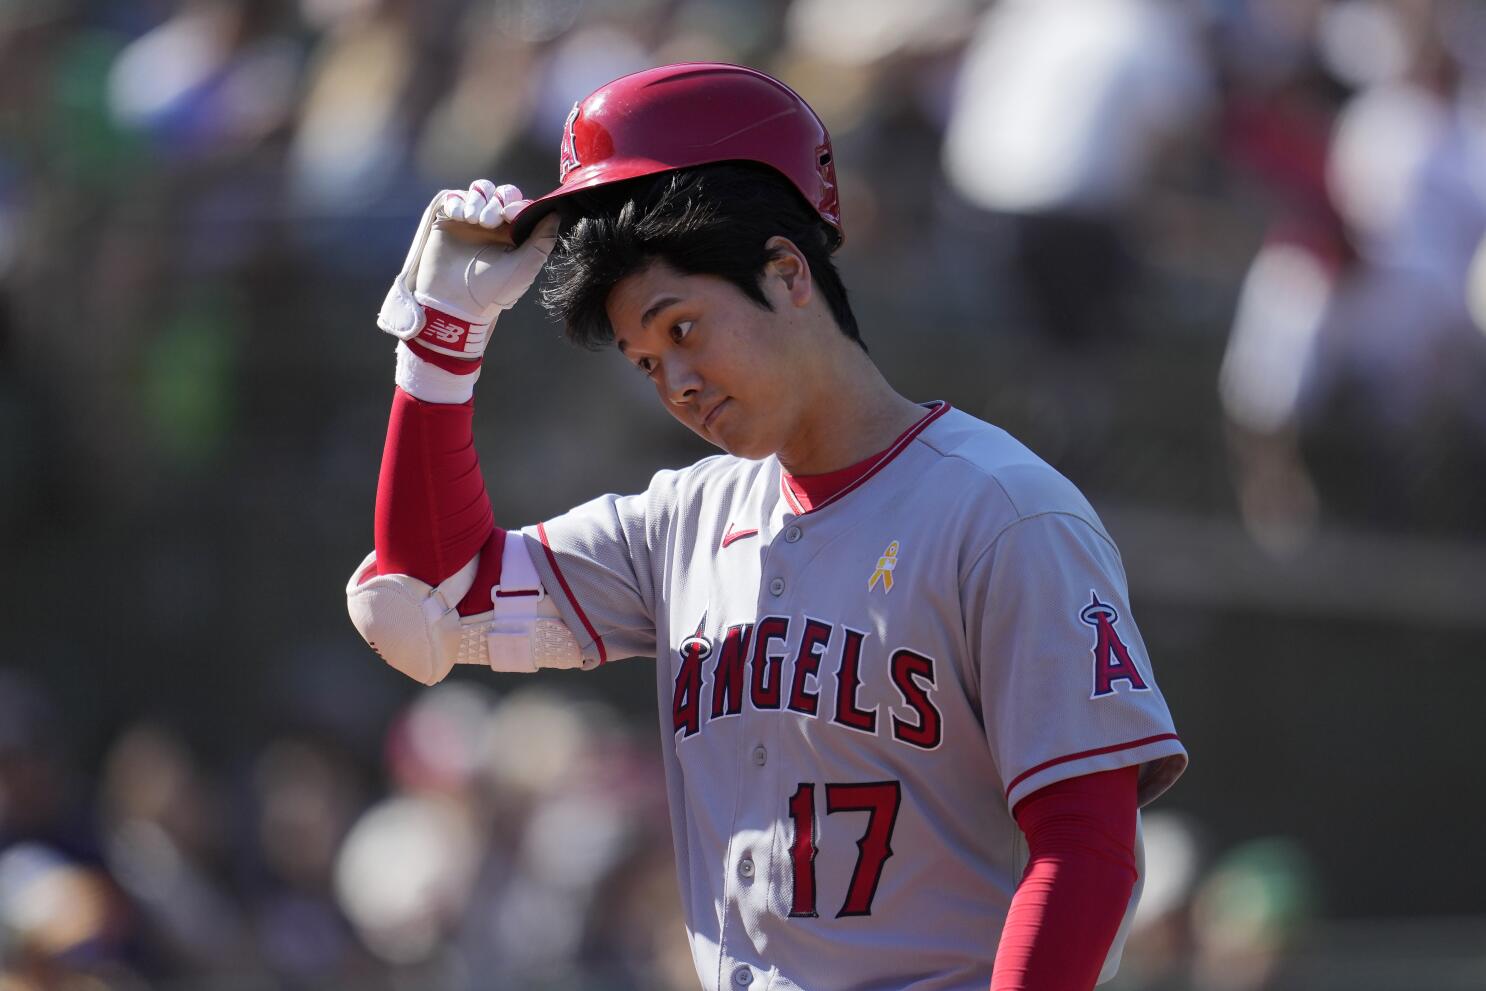 By The Numbers: Shohei Ohtani's historic two-way season